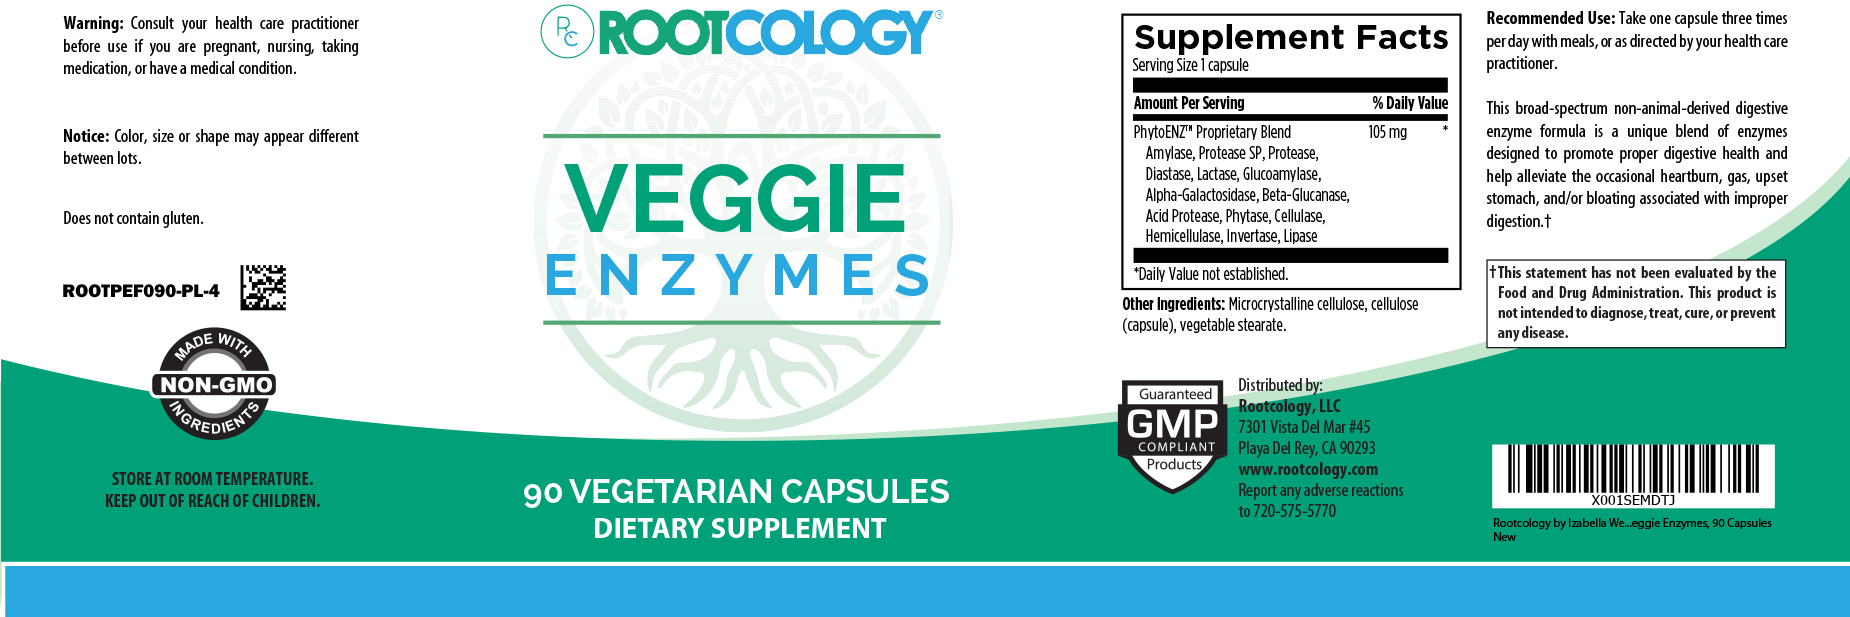 Rootcology Veggie Enzymes Supplement Label